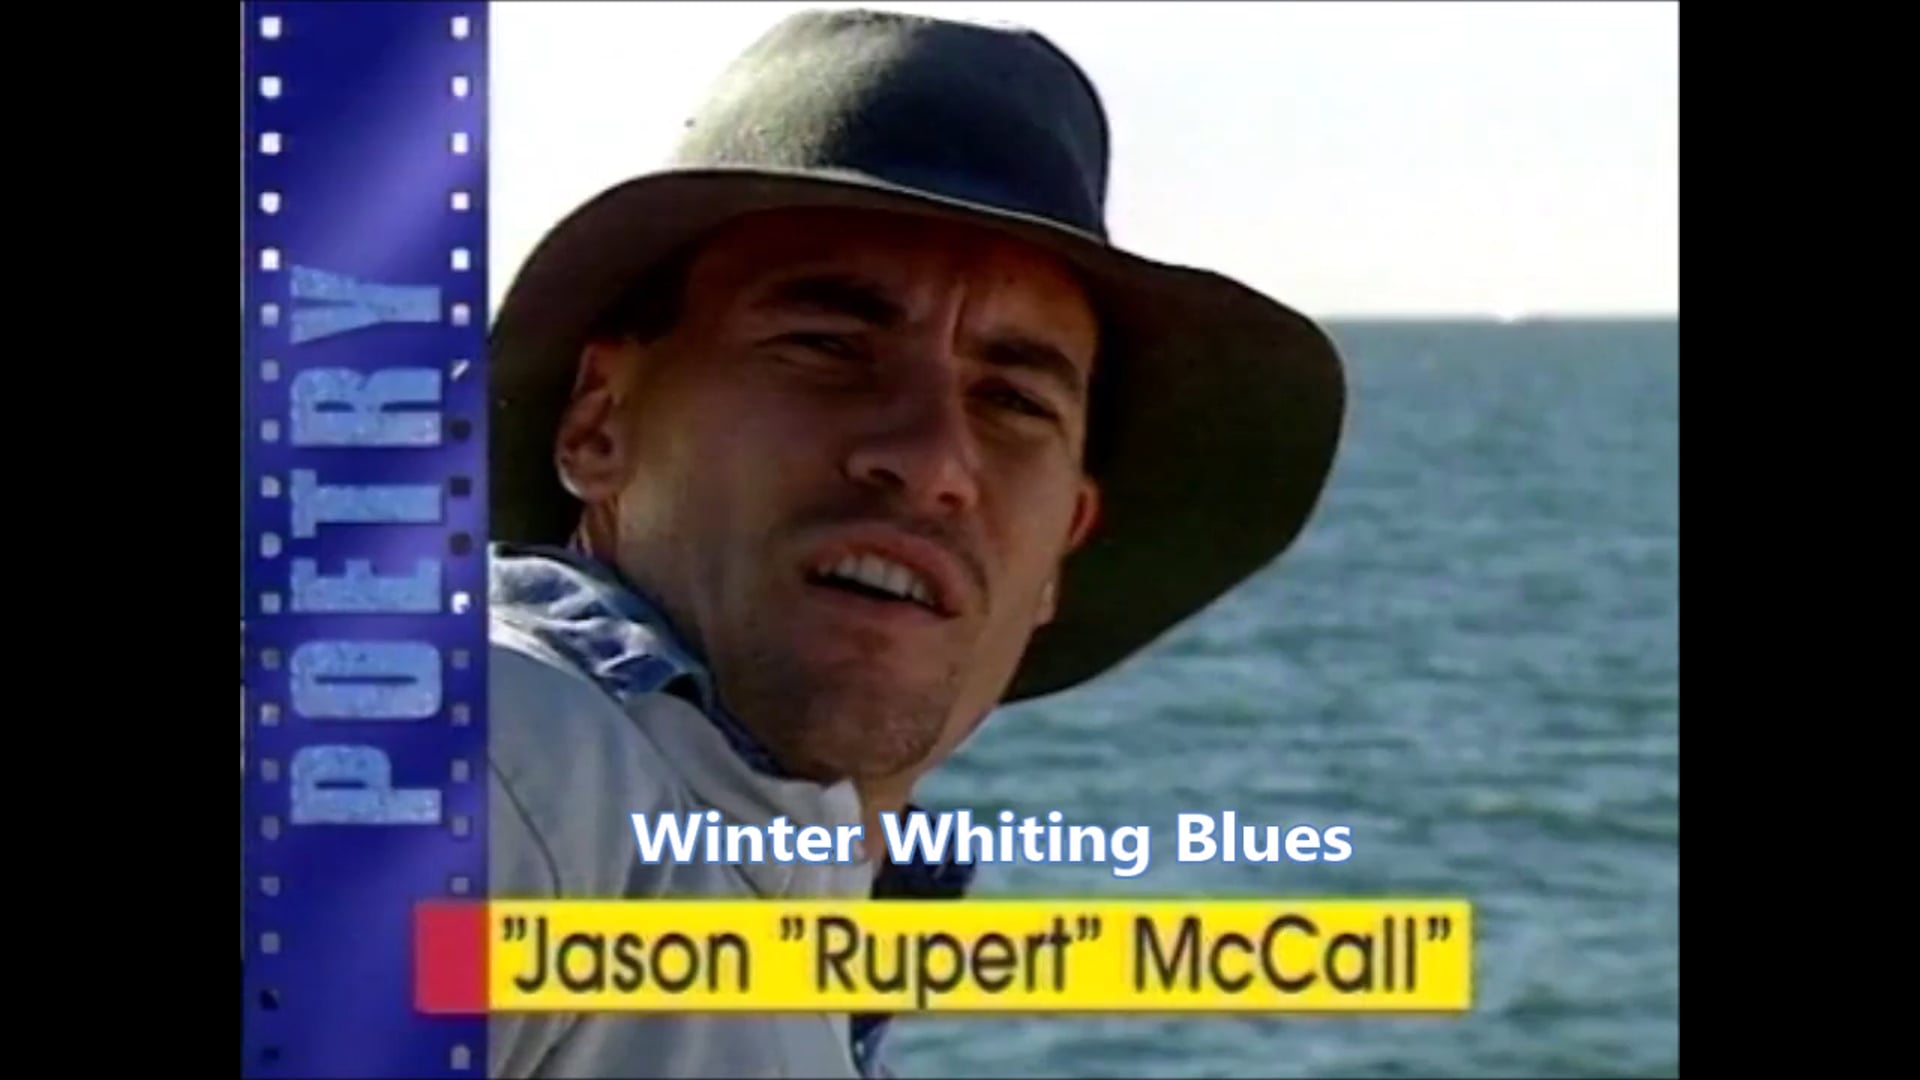 The Winter Whiting Blues – Rupert McCall